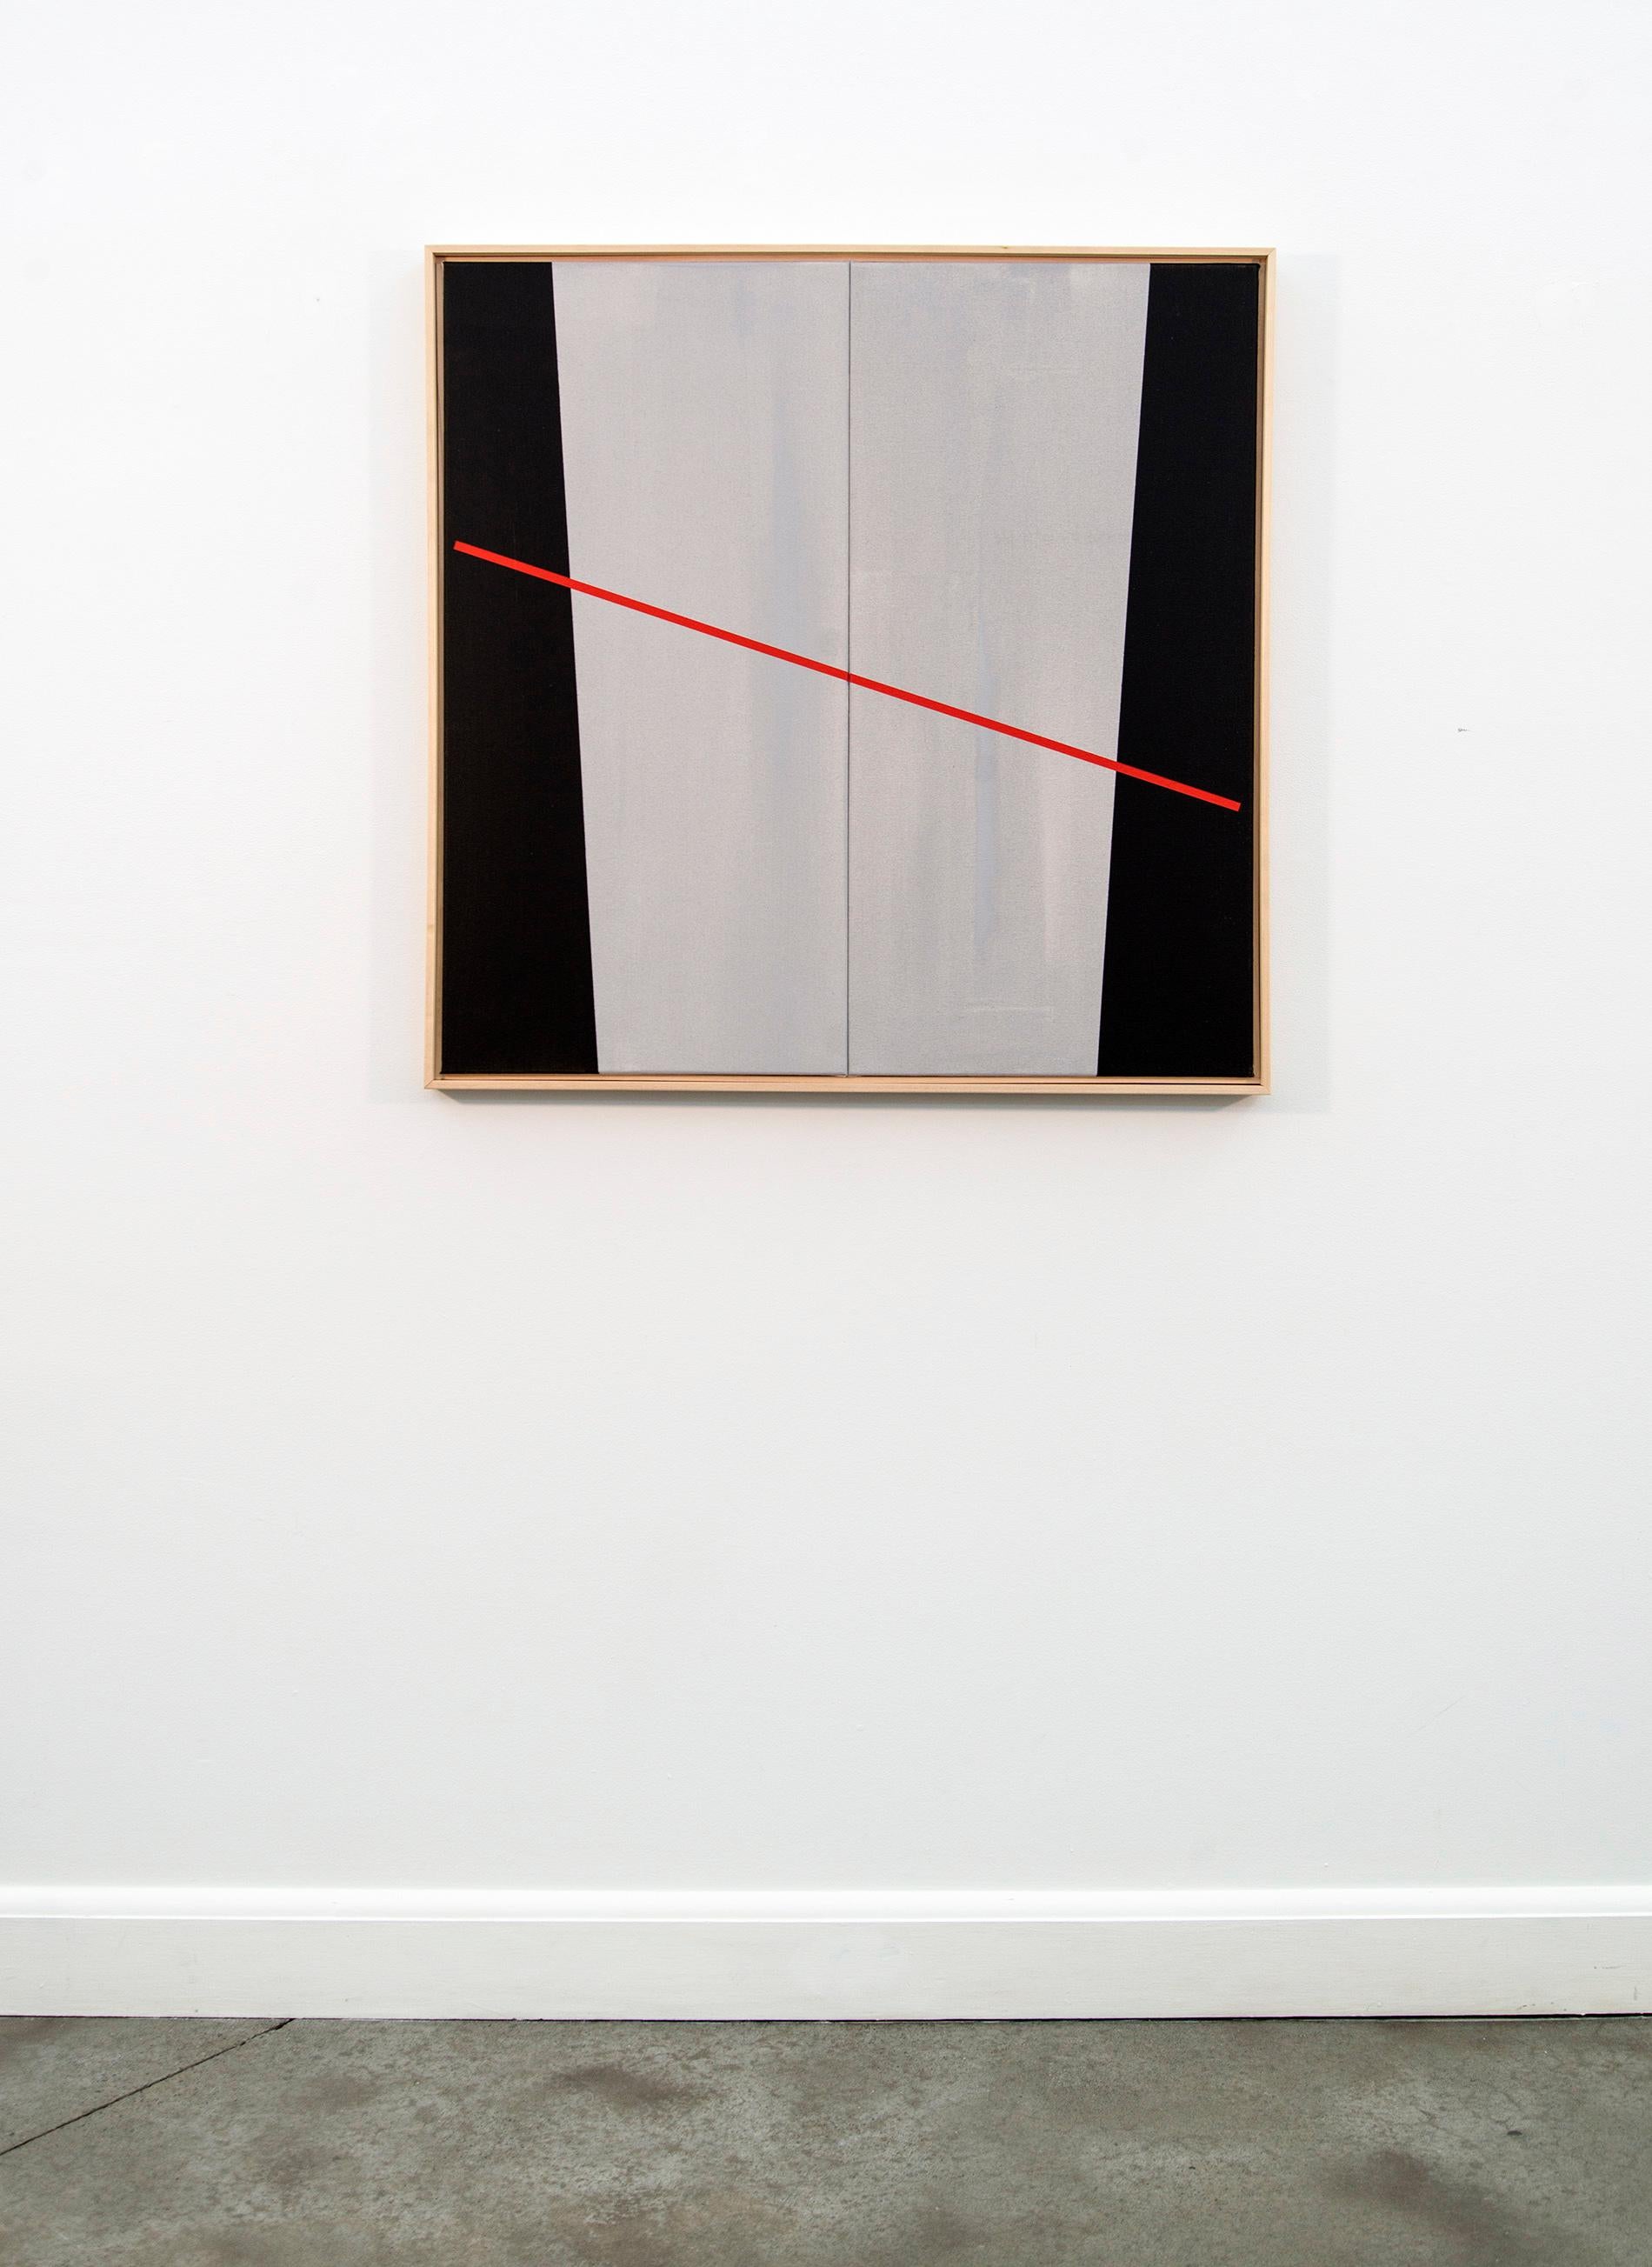 Created in a neutral palette apart from a crisp red descending line, Uncertain Terms encapsulates Ristvedt's response to the pandemic: cautious optimism. This hard-edge painting demonstrates Ristvedt's ability to communicate through subtle formal